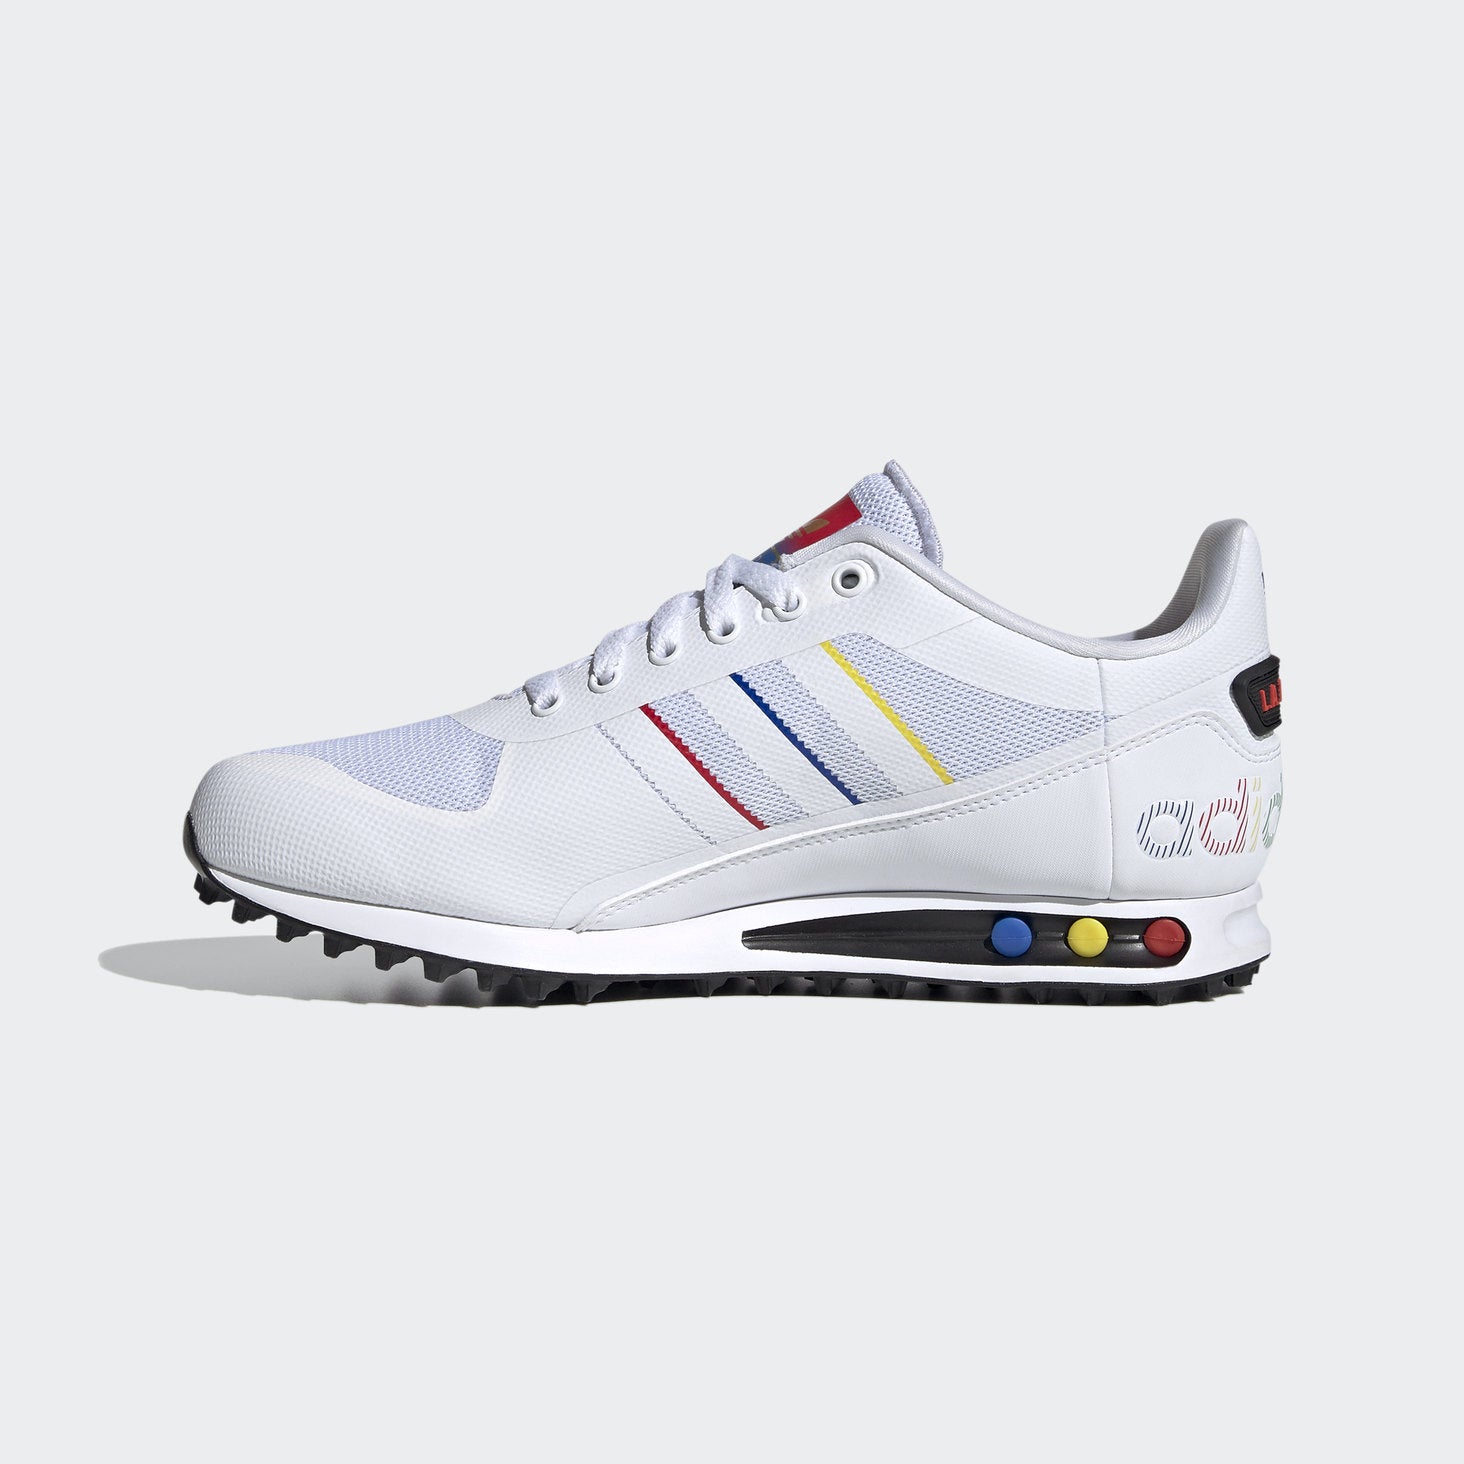 Adidas LA Trainer II in White/Blue/Red | Find Your Sole